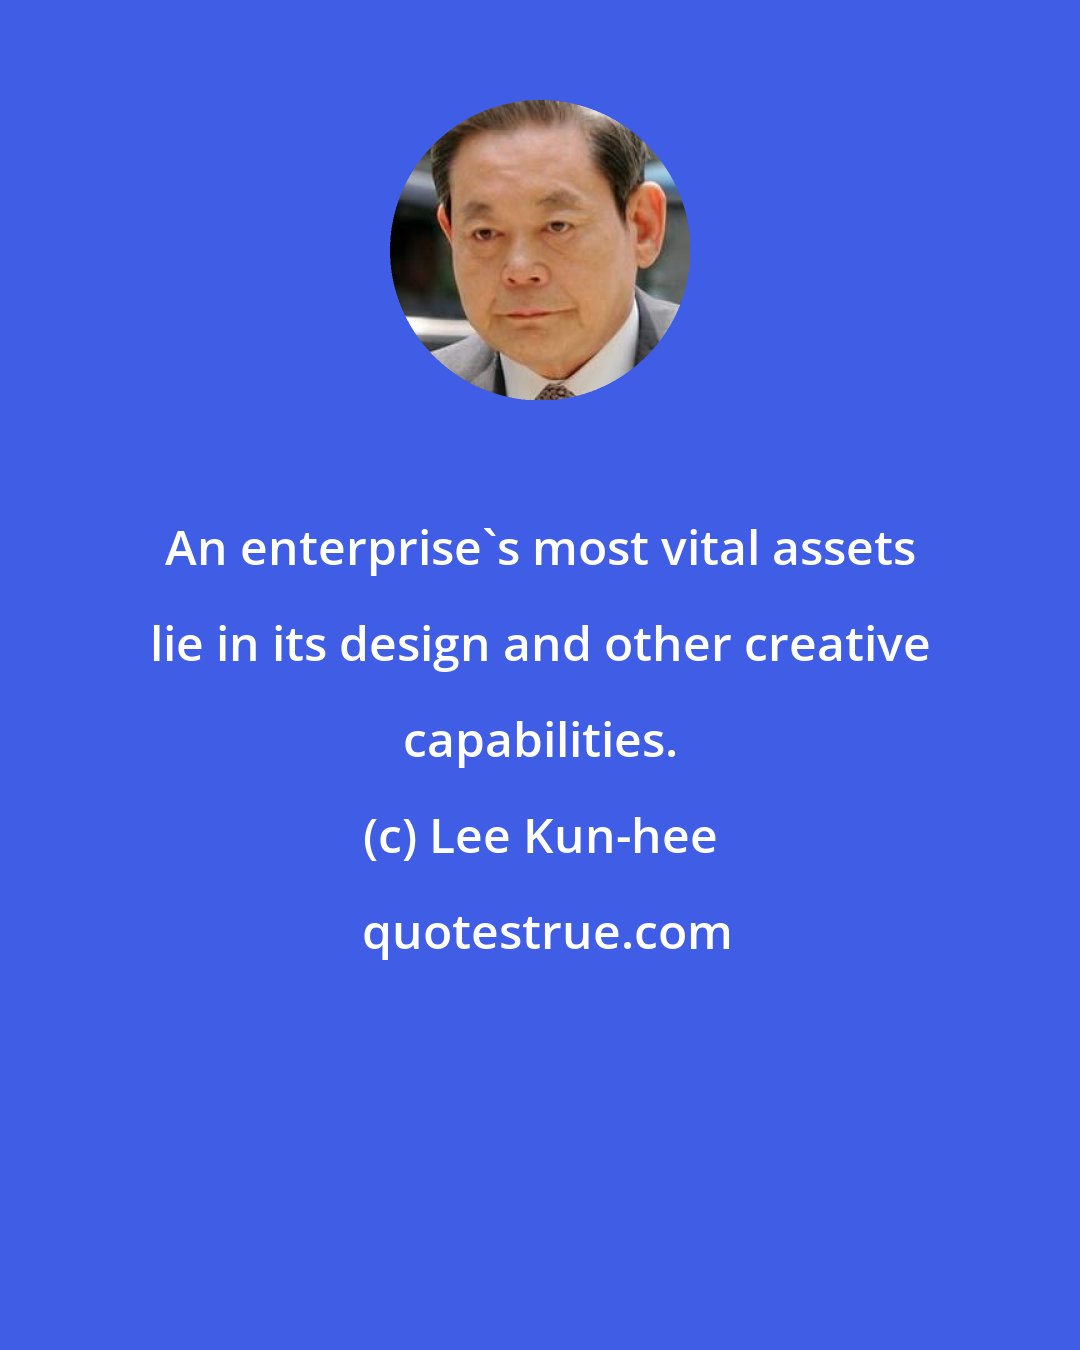 Lee Kun-hee: An enterprise's most vital assets lie in its design and other creative capabilities.